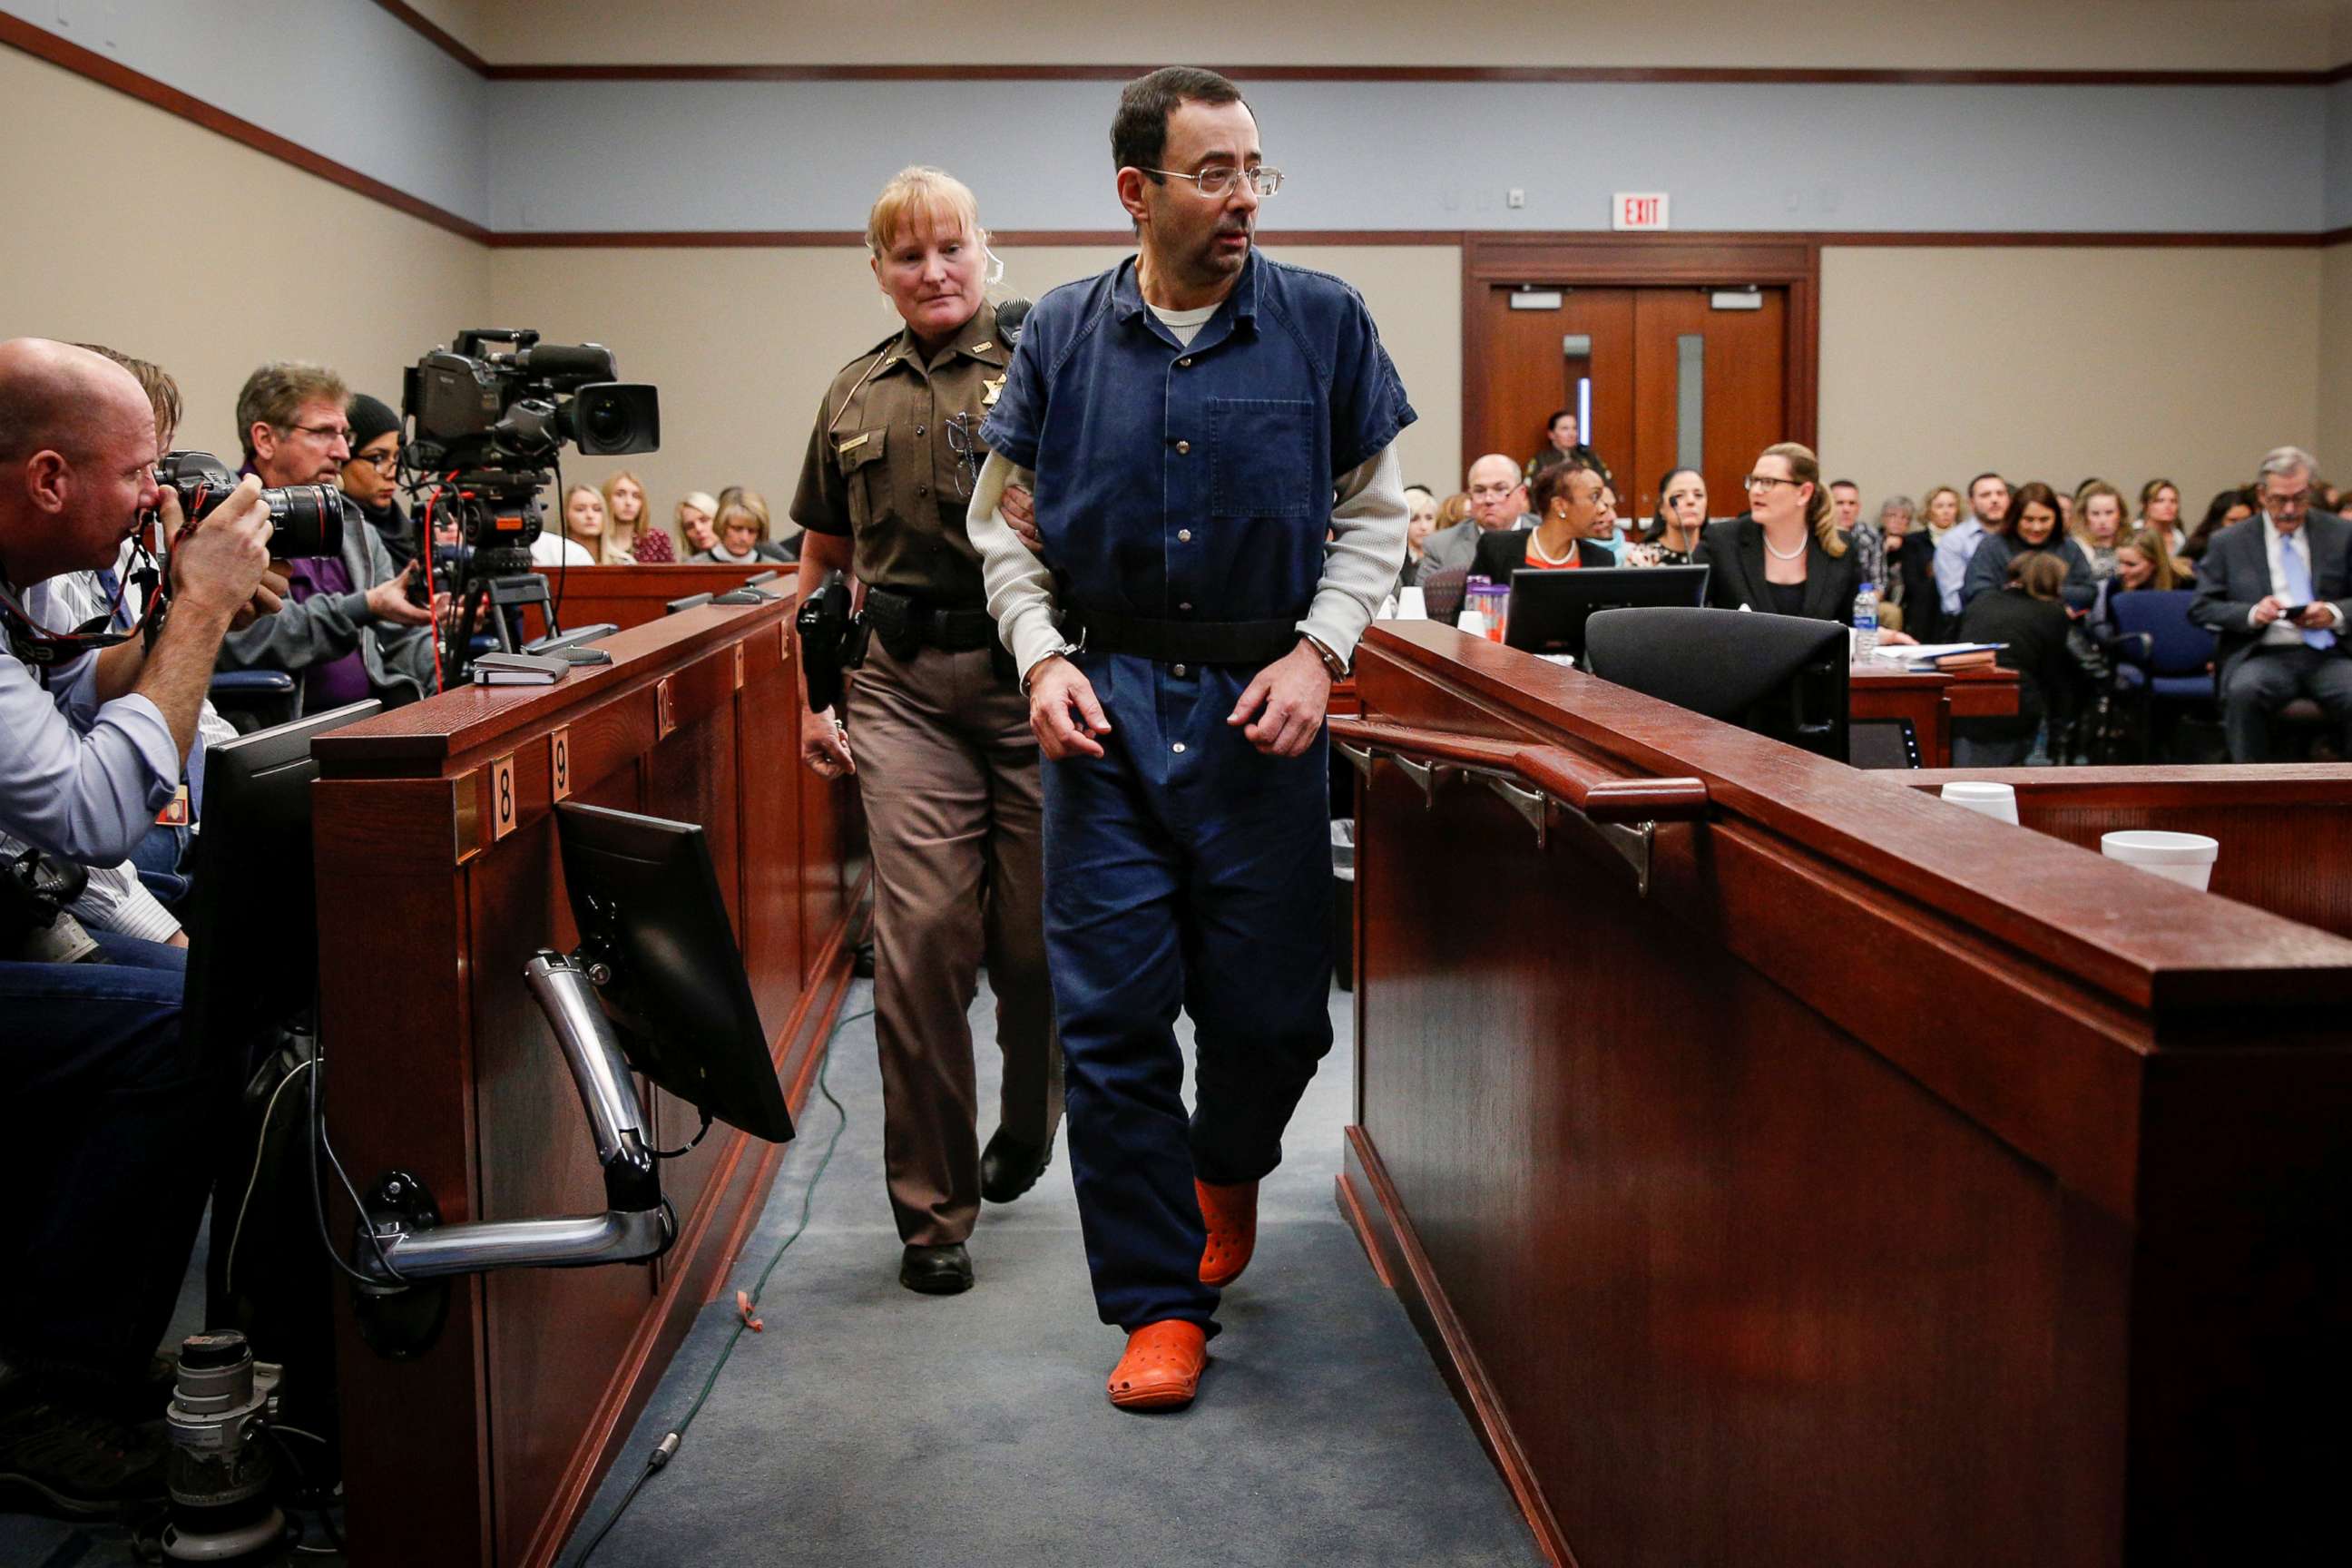 PHOTO: Larry Nassar, a former team USA Gymnastics doctor who pleaded guilty in November 2017 to sexual assault charges, is escorted by a court officer during his sentencing hearing in Lansing, Mich., Jan. 17, 2018.